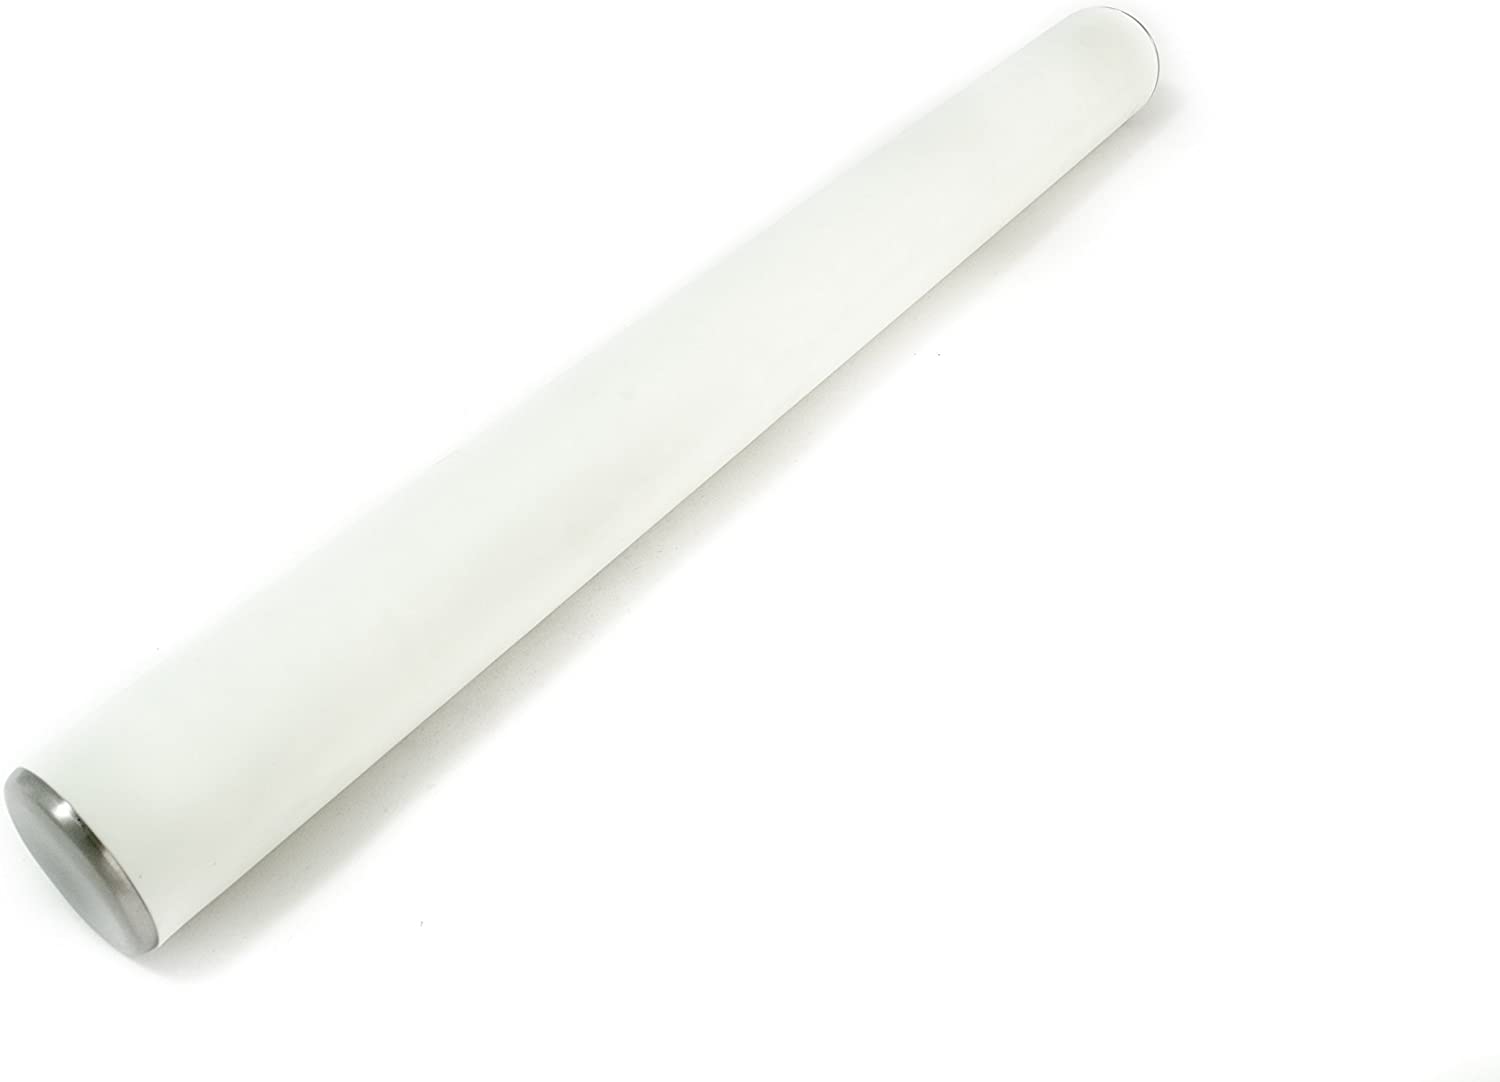 Staedter Städter 803503 Professional Rolling Pin 50 cm Long Non-Stick Silicon White